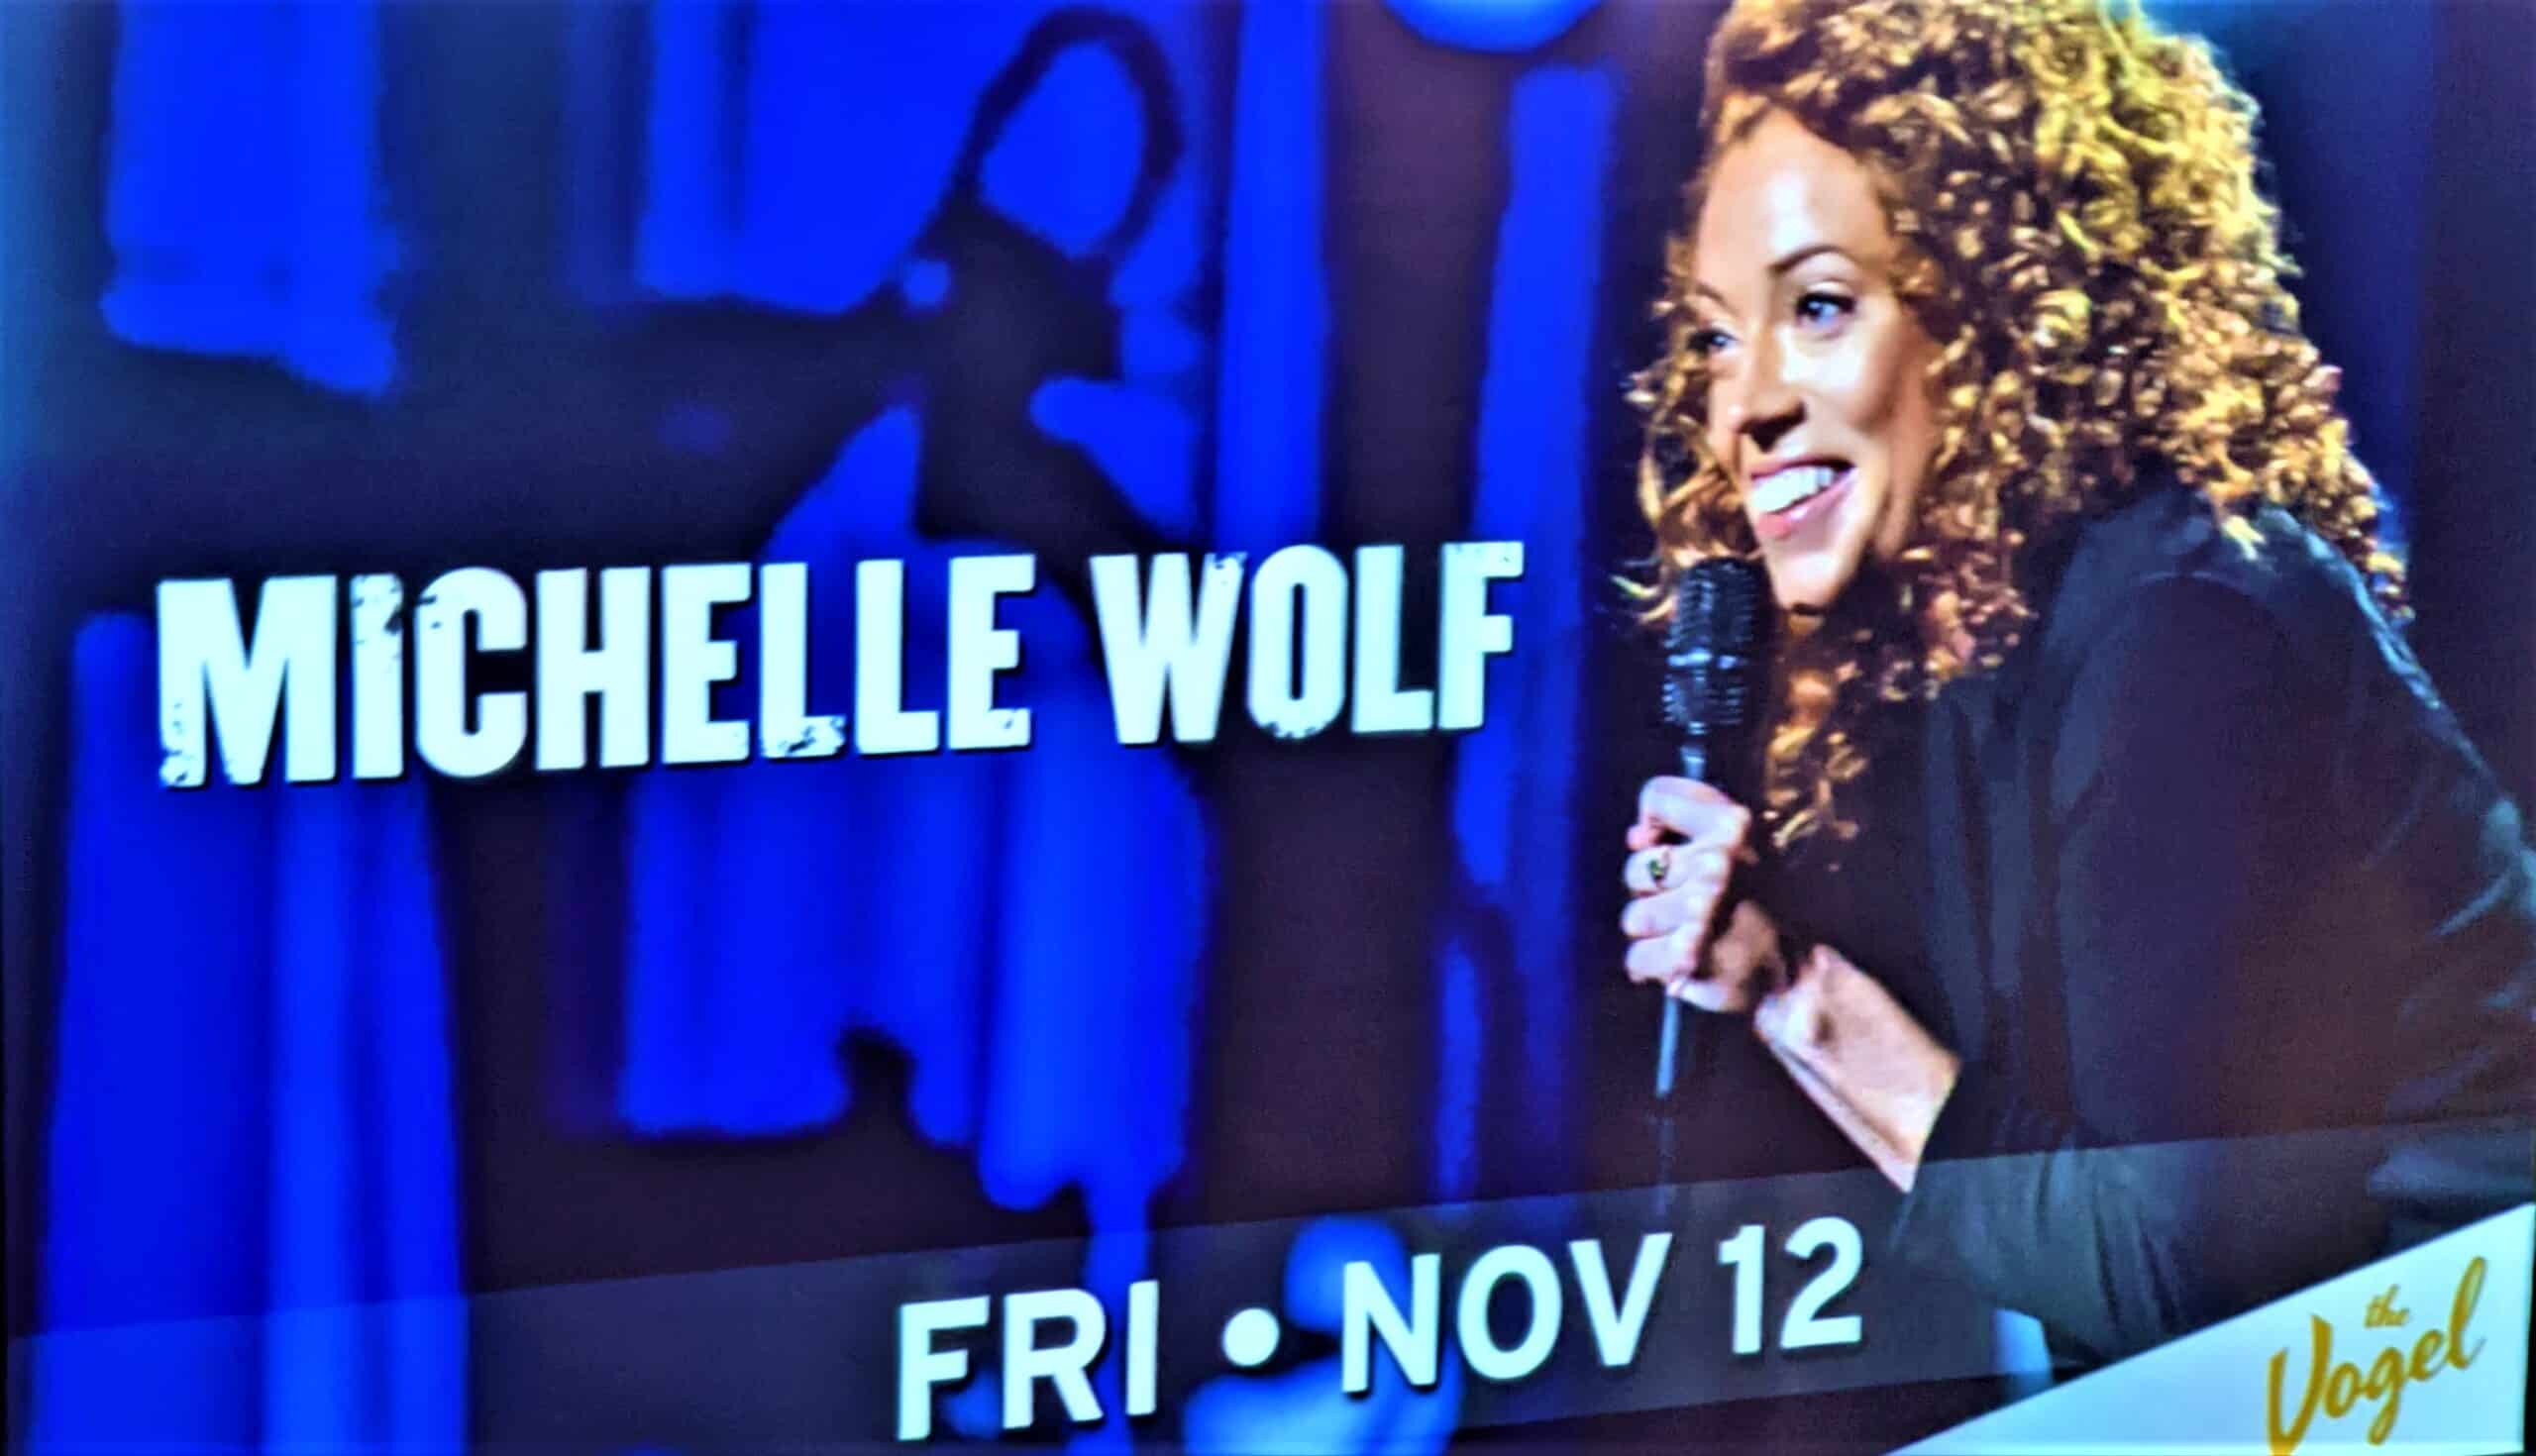 Michelle Wolf Live At The Count Basie Center Of The Arts